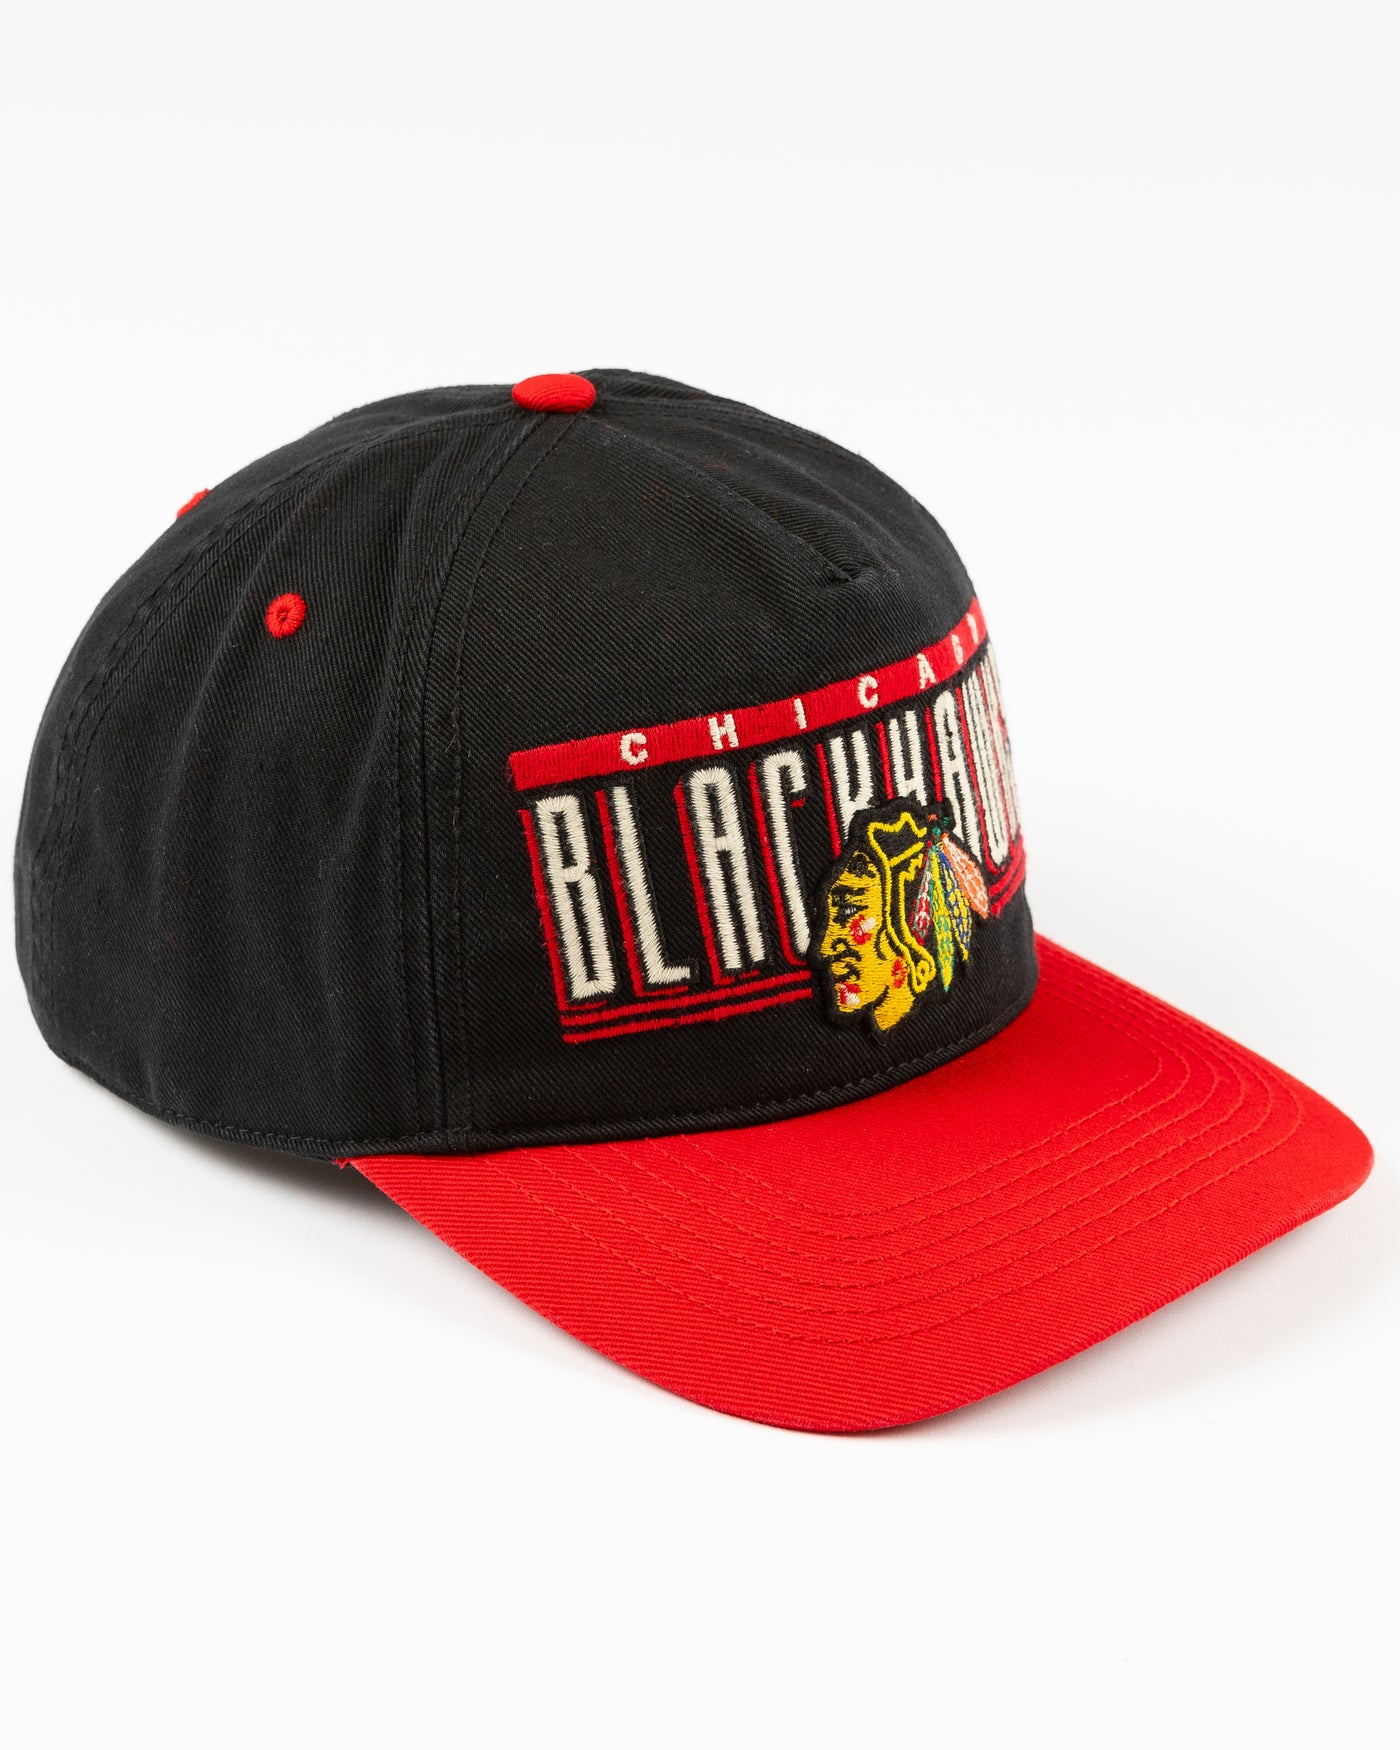 black and red '47 brand snapback hat with Chicago Blackhawks wordmark and primary logo embroidered on the front - right angle lay flat